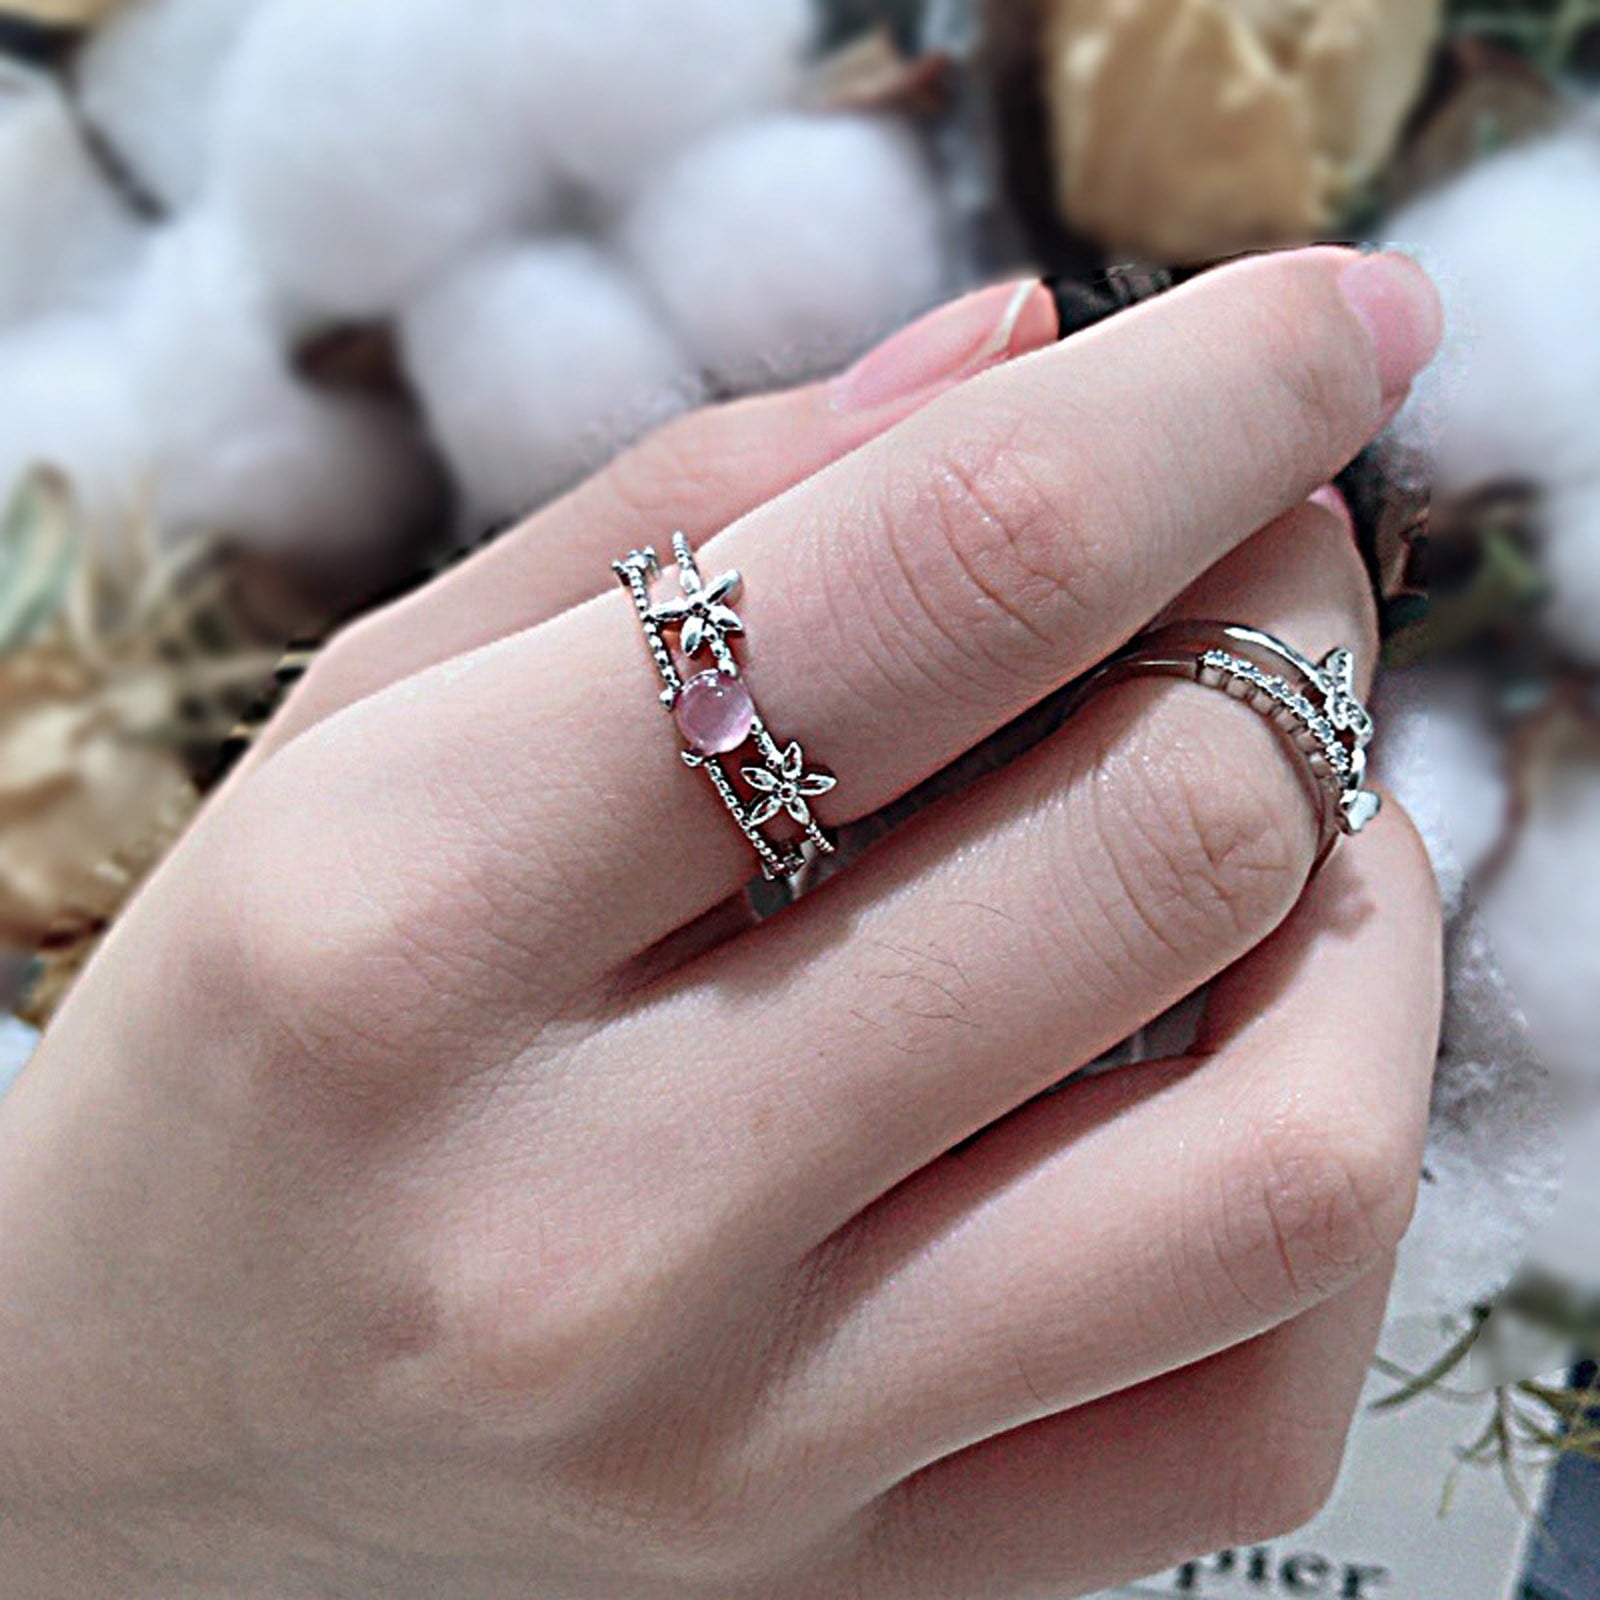 Buy Adjustable Silver Ring, Boho Rings, Silver Statement Ring, Floral Ring,  Big Silver Ring, Hippie Accessories, Silver Rings Online in India - Etsy